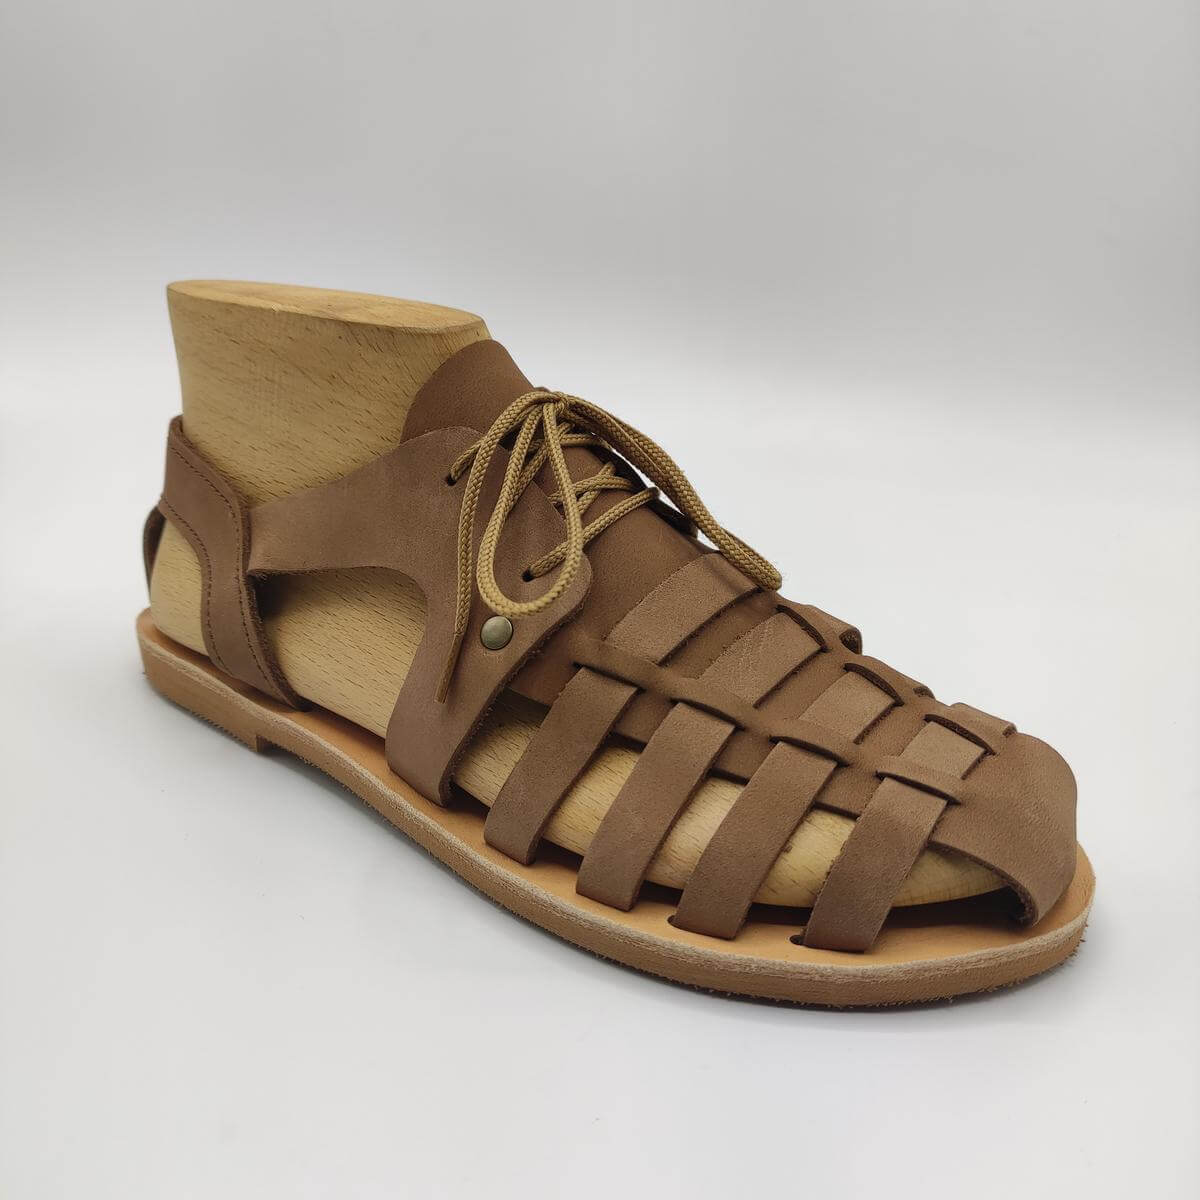 Lib Round Toe Summer Ankle Straps Gladiator Fretwork Flat Sandals - Auburn  in Shoes & Flats - $79.19